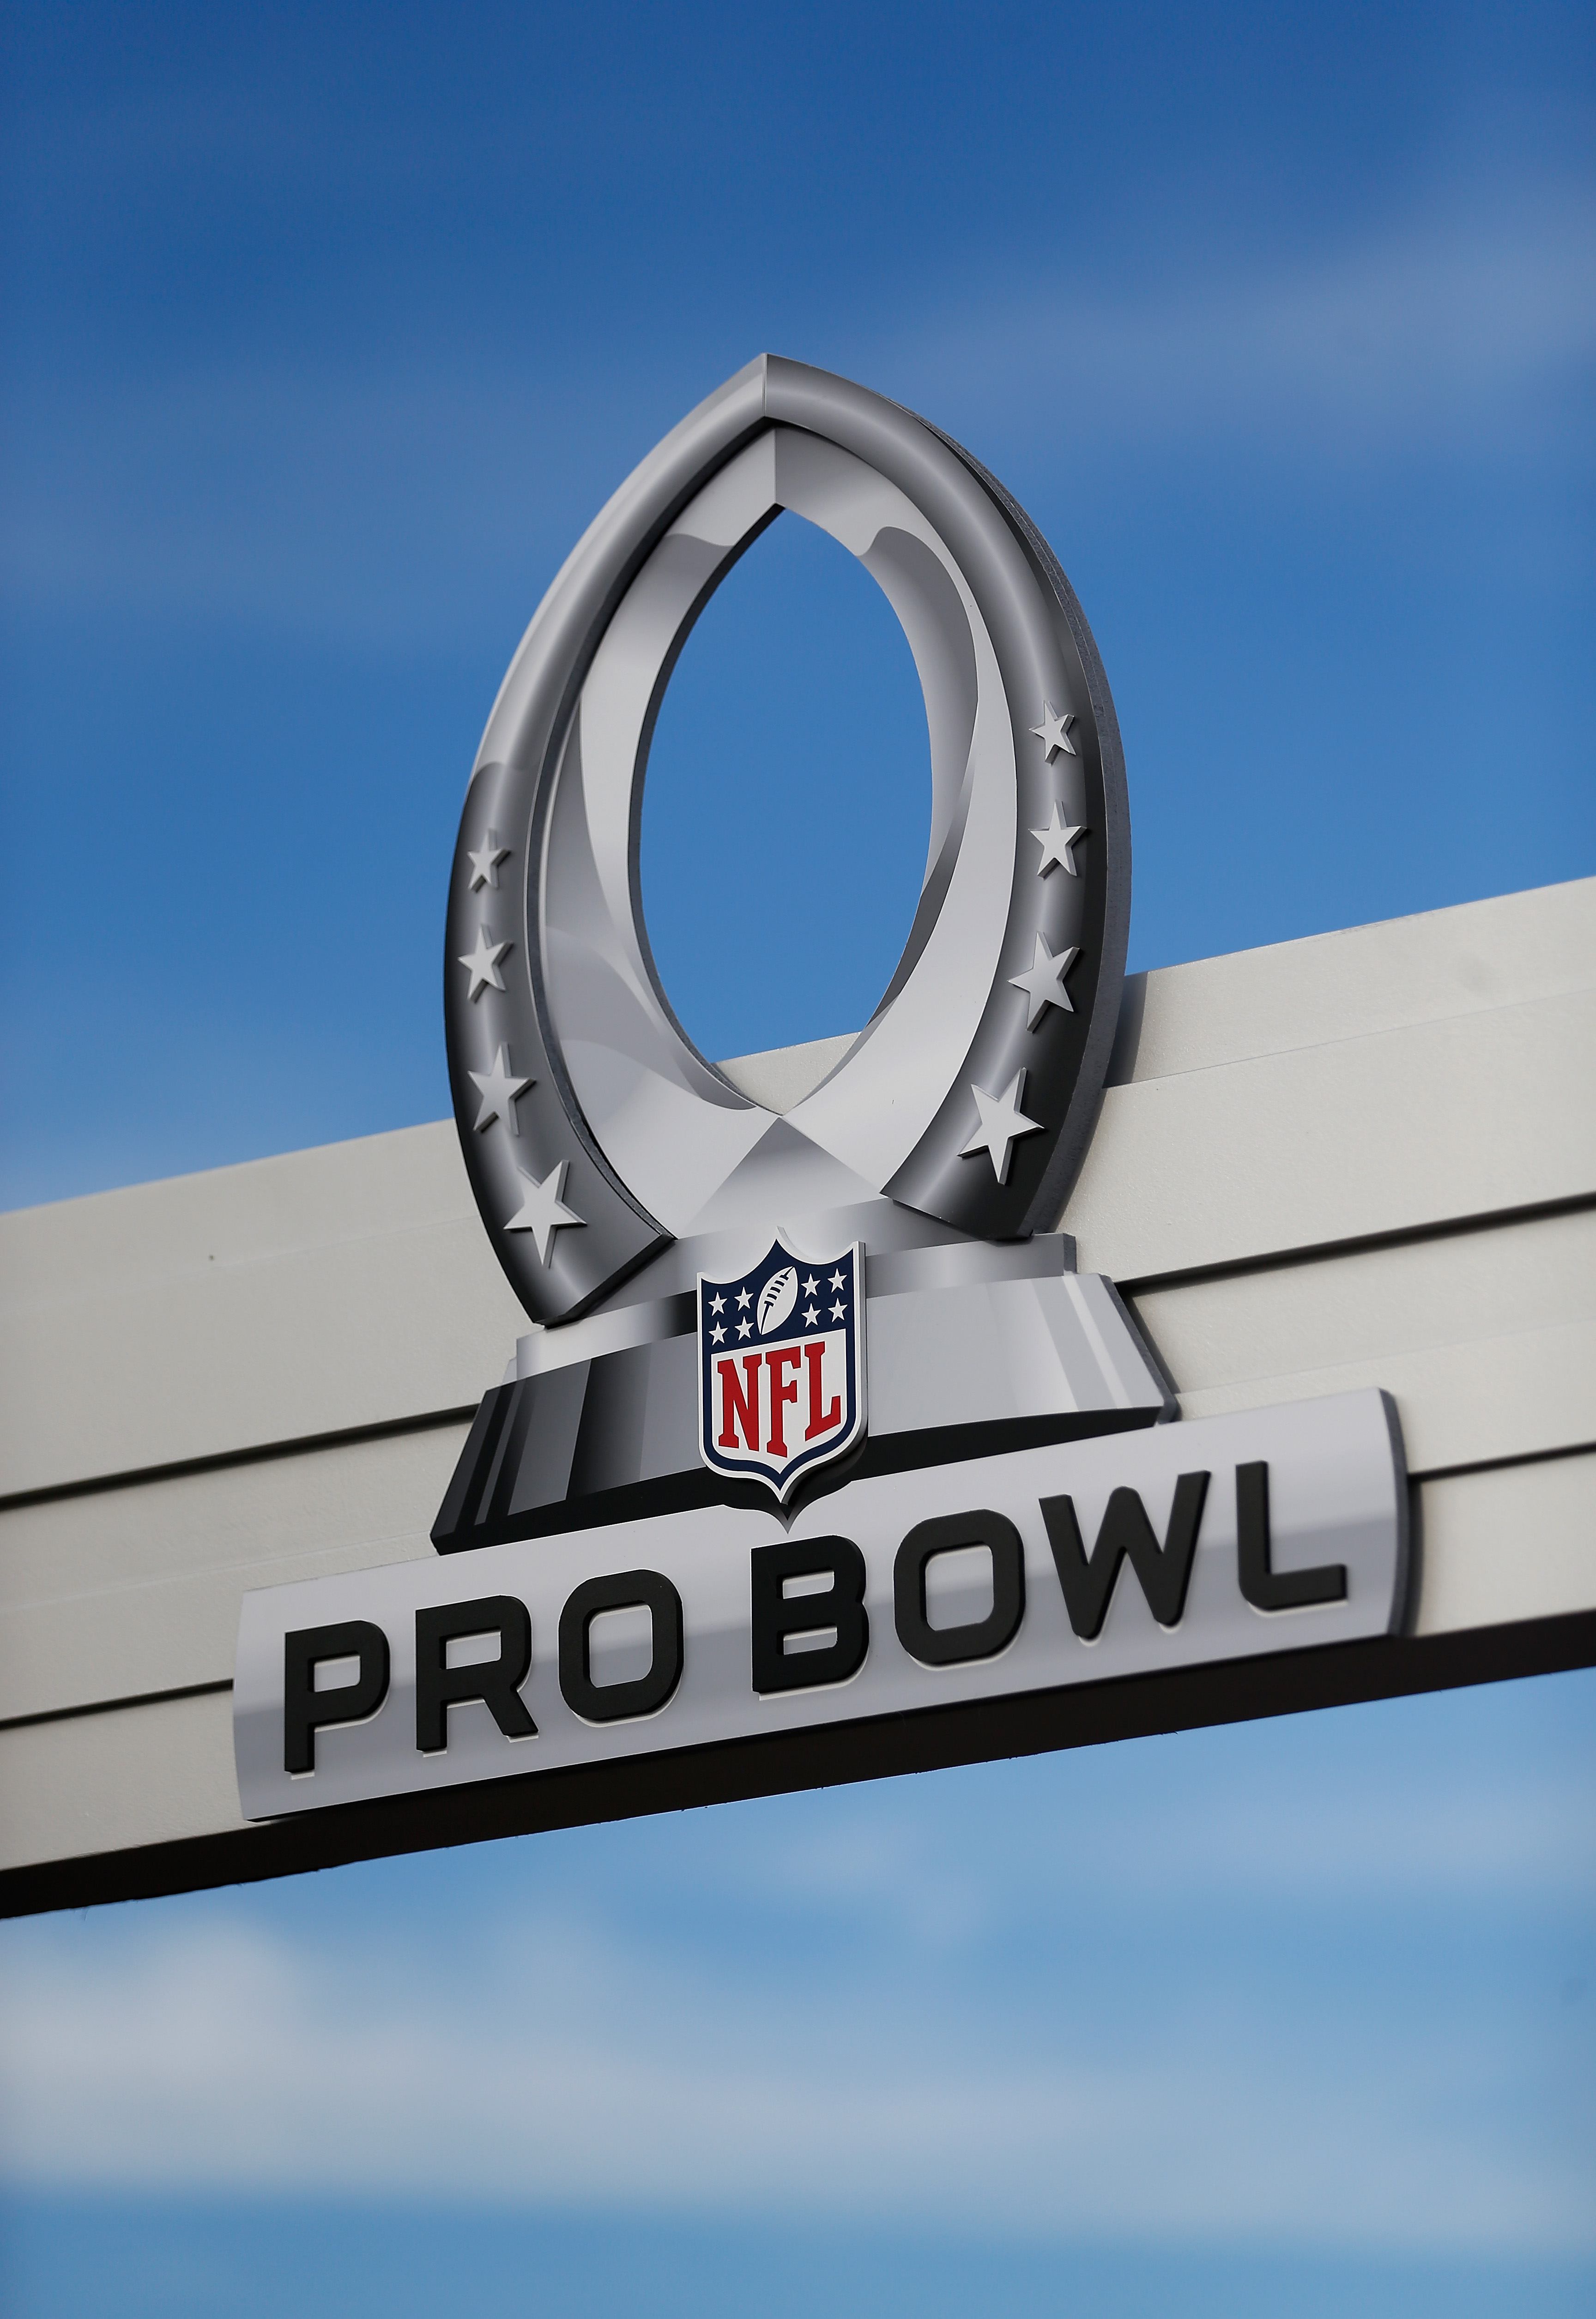 A general view of the 2015 Pro Bowl logo outside the University of Phoenix Stadium on January 25, 2015 in Glendale, Arizona.